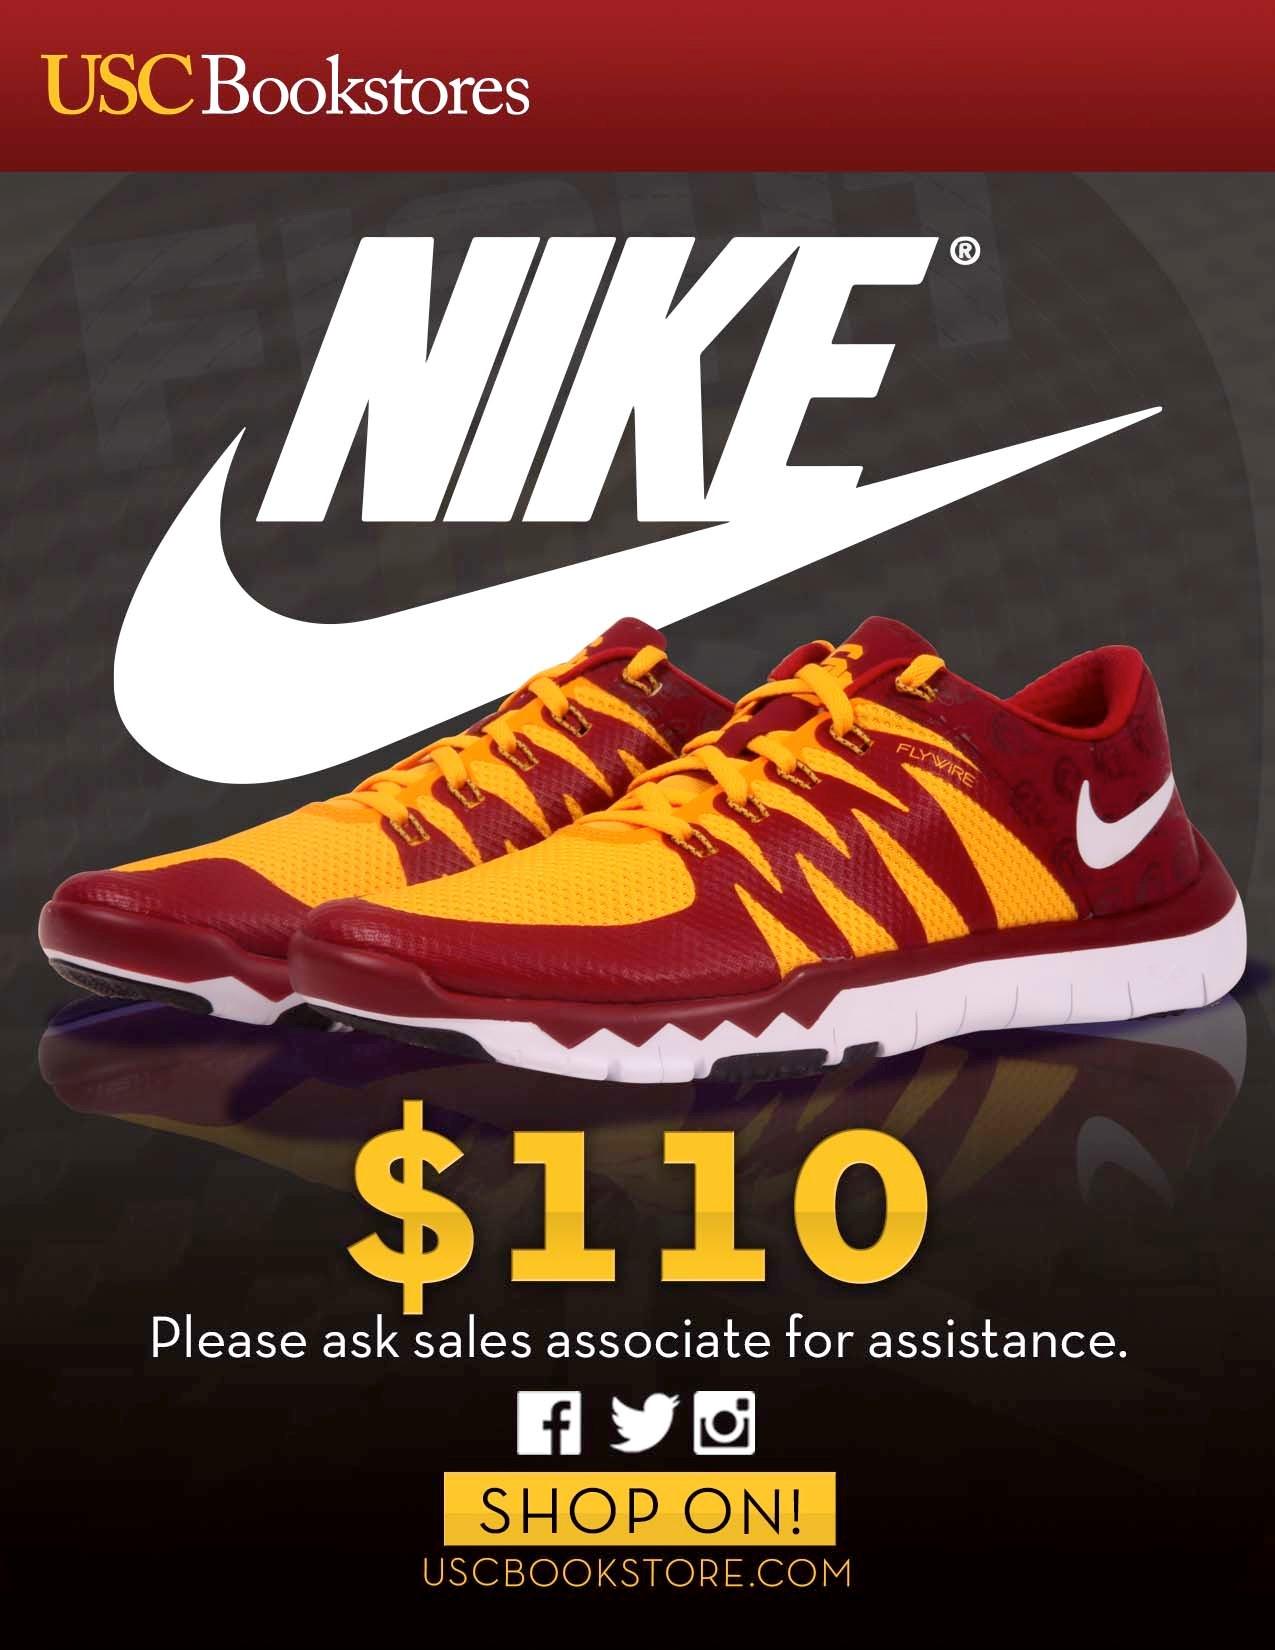 Bookstore on Twitter: "Custom #USC #Nike shoes are still in stock at the Bookstore! #fighton #Trojans http://t.co/8qb9ylk9Qu" / Twitter